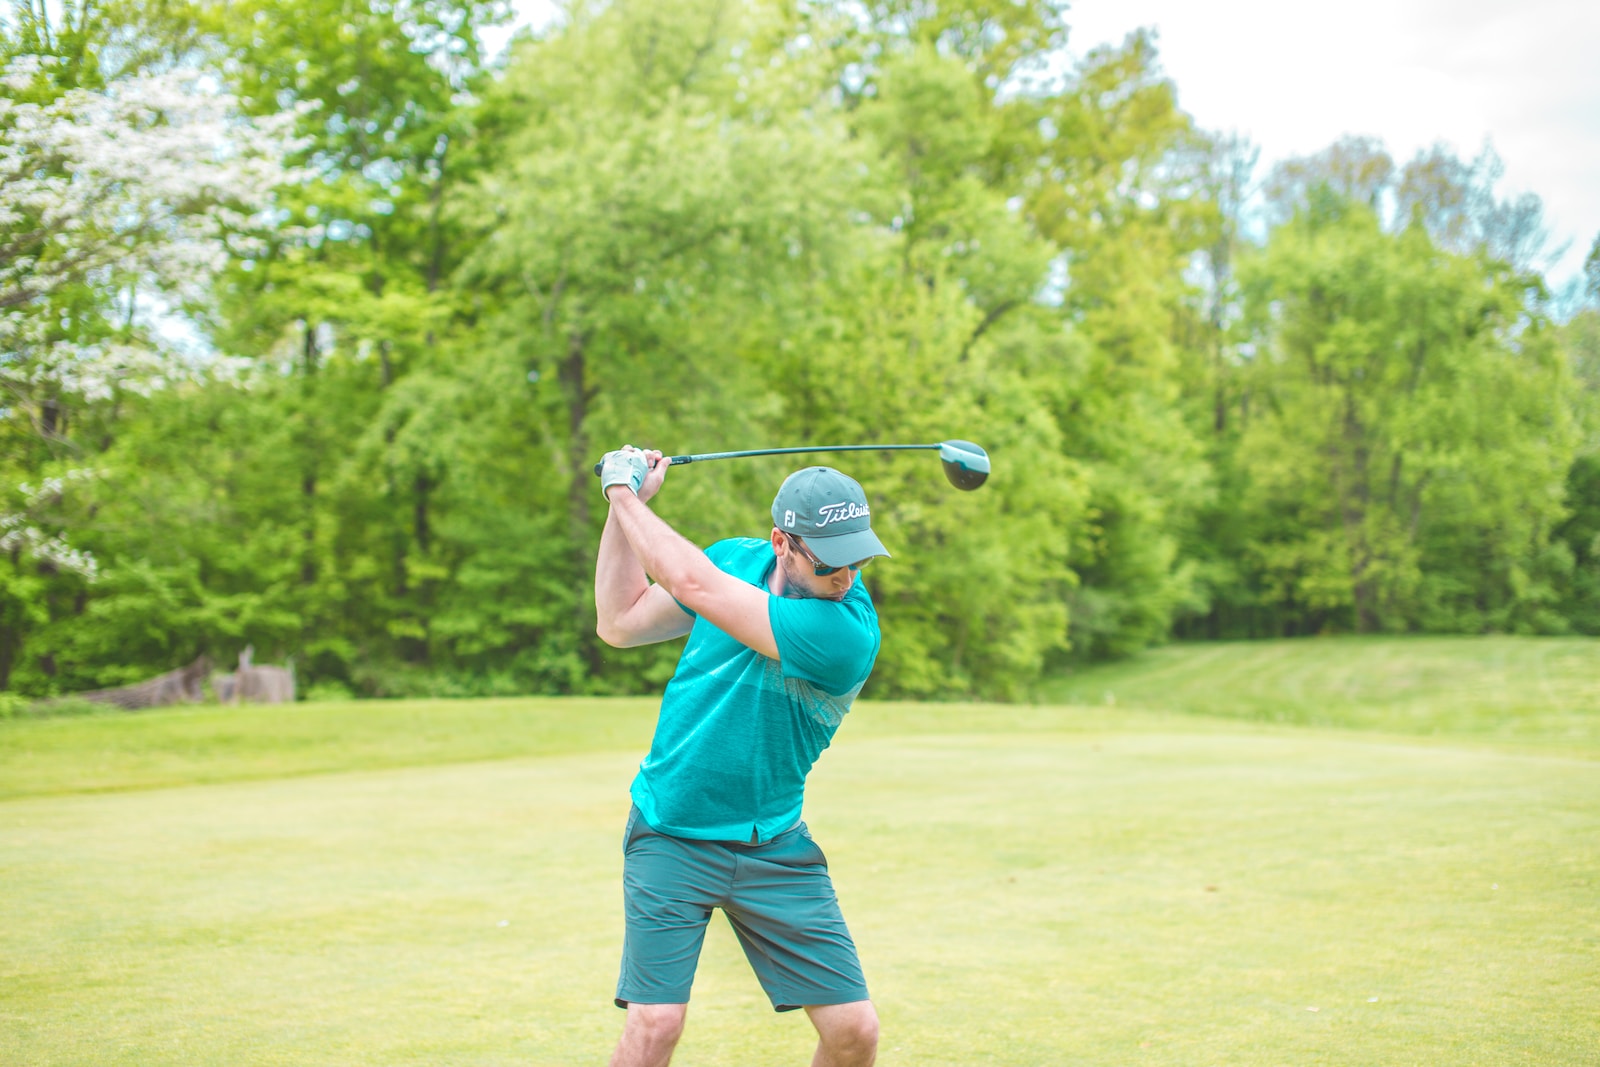 How to Achieve a Tension Free Golf Swing